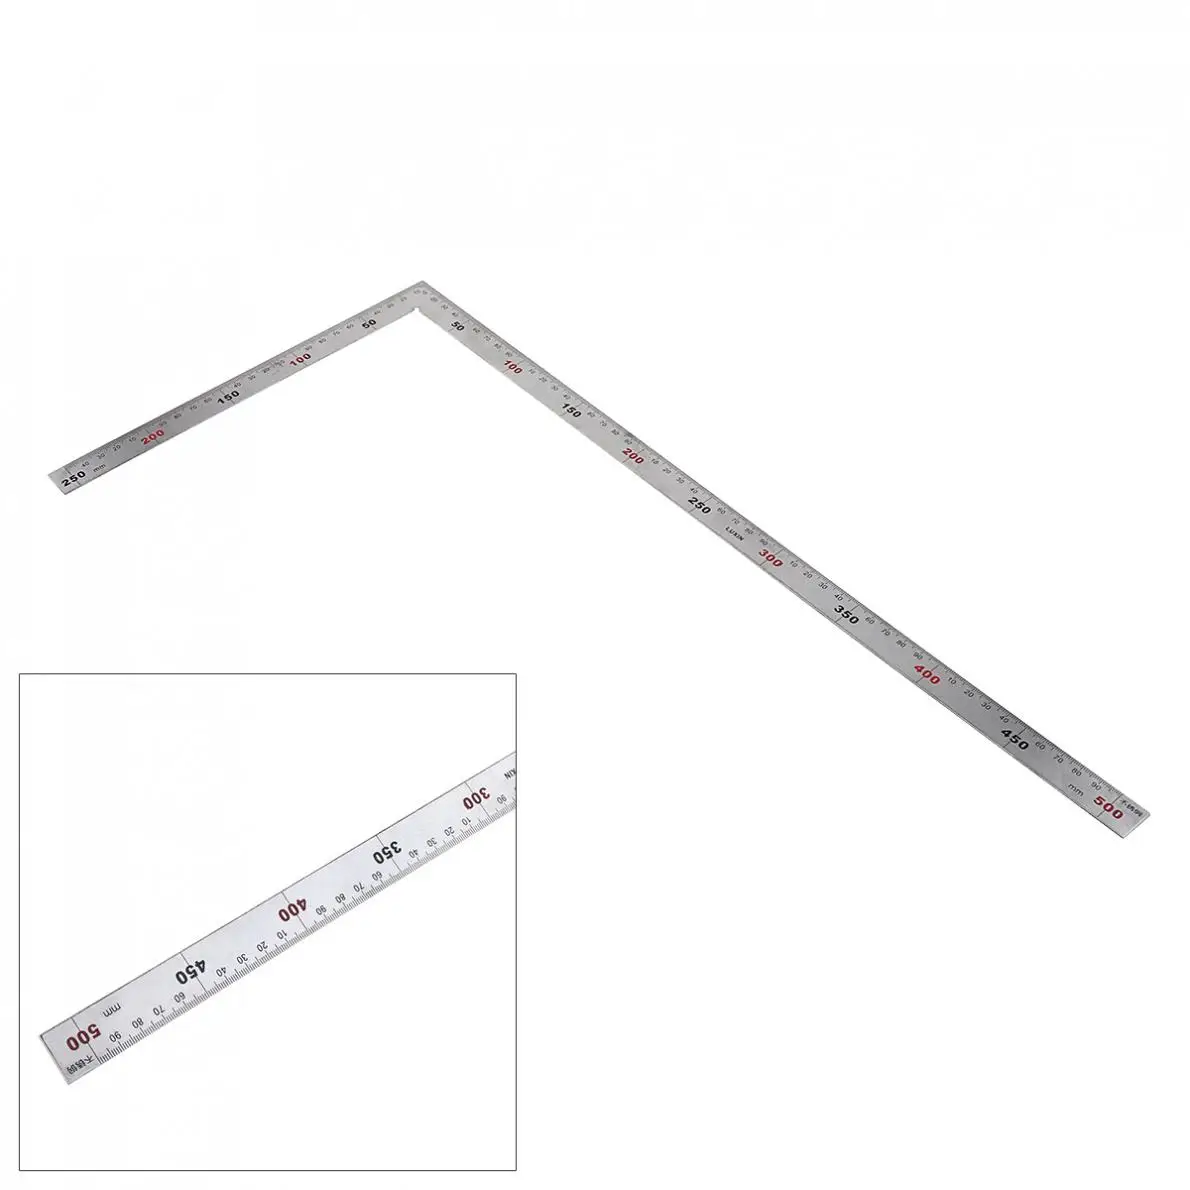 

Useful 250 x 500mm Thicker 1.2mm Stainless Steel 90 Degree Right Angle Ruler for Woodworking / Office